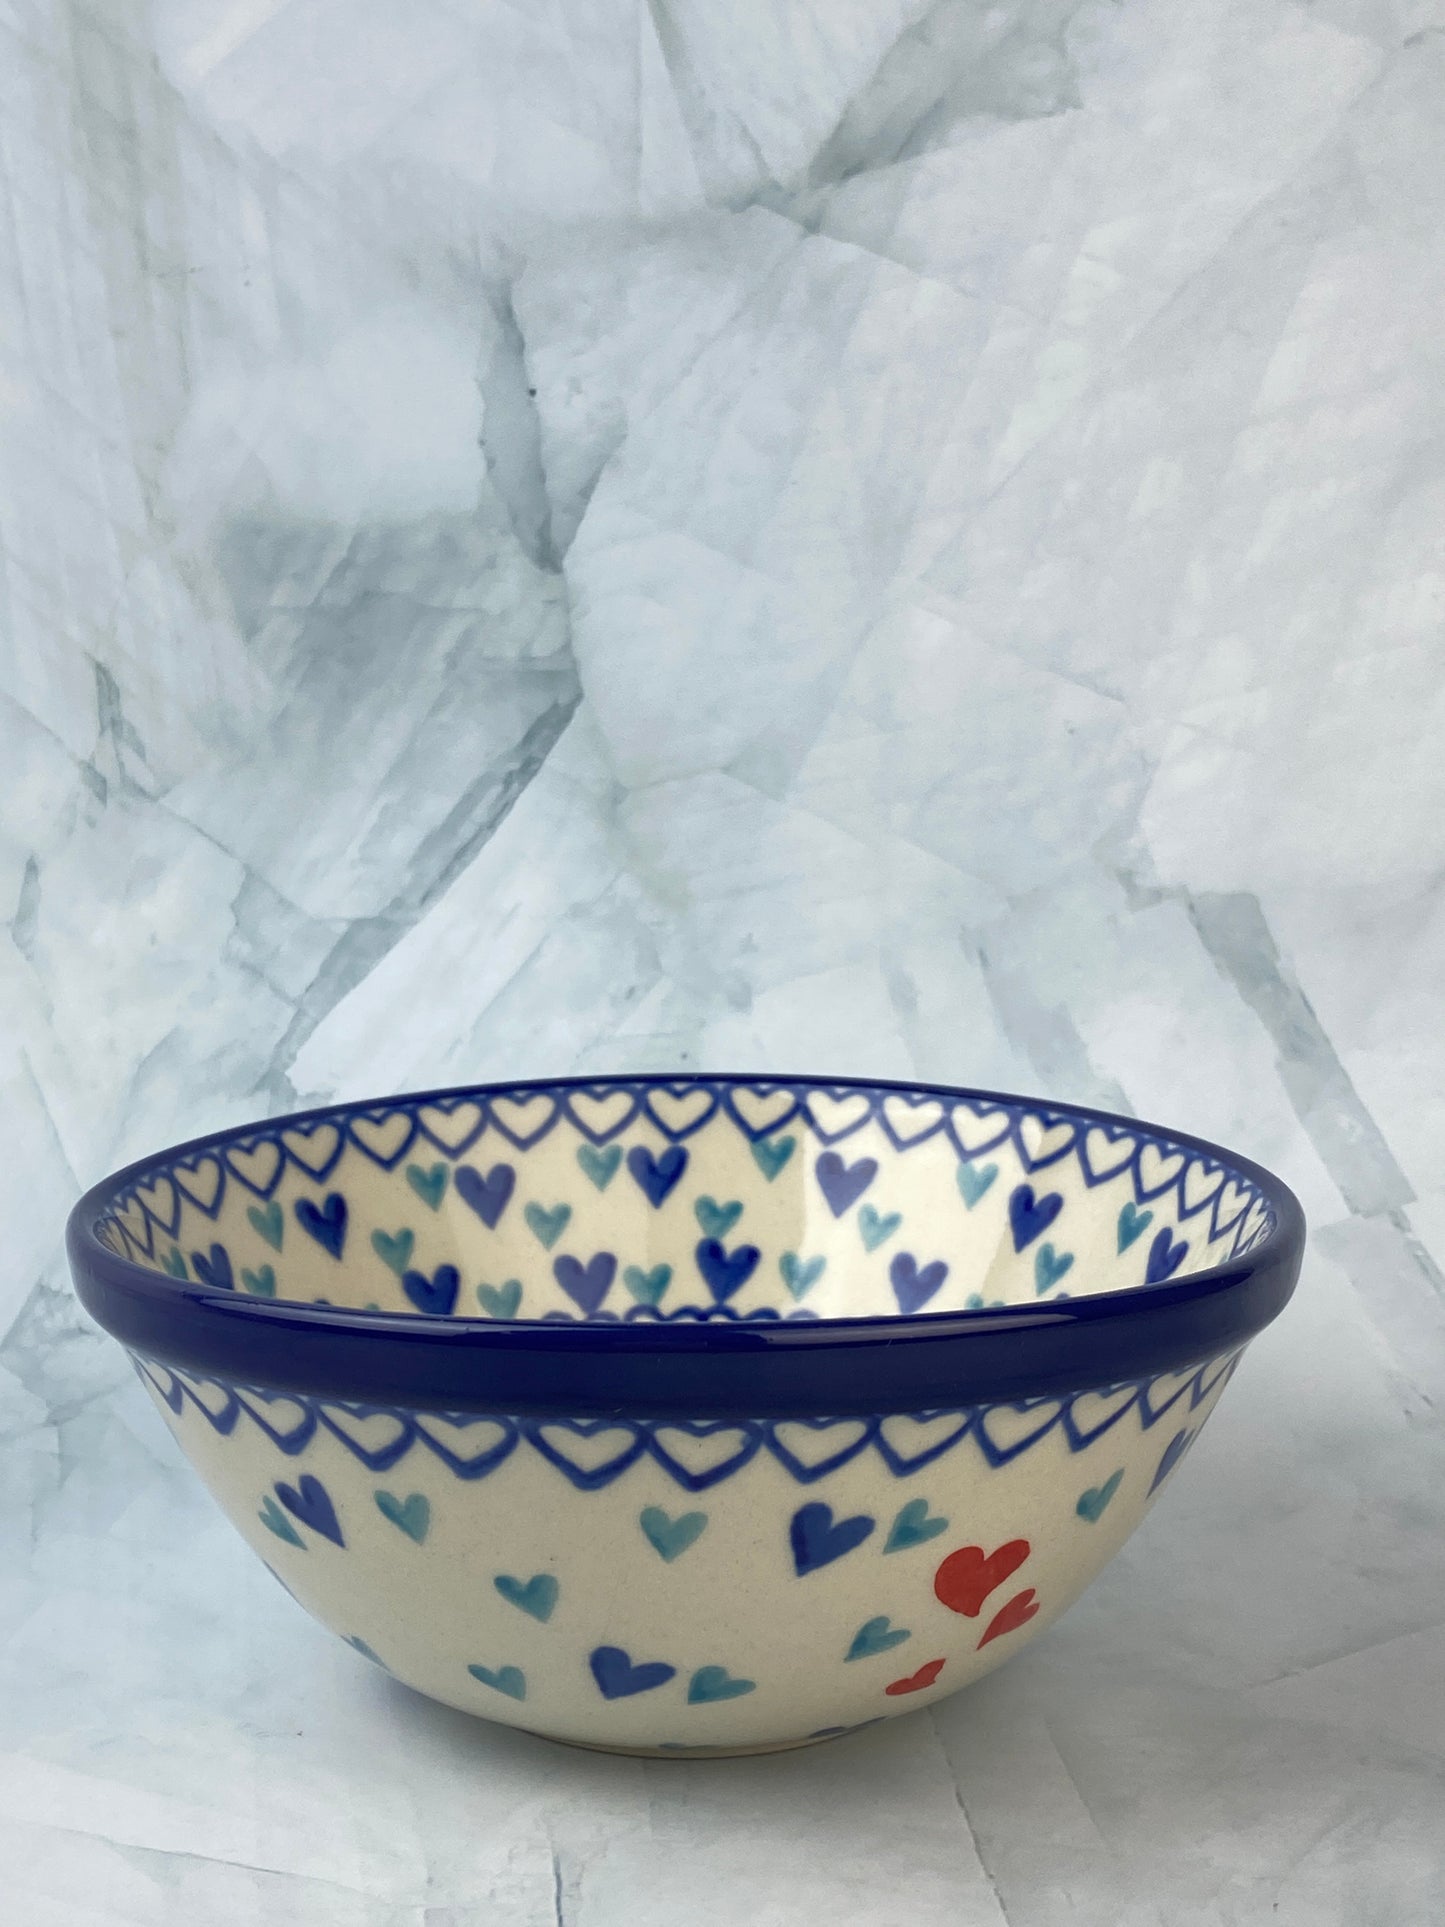 Small Cereal Bowl - Shape 59 - Pattern 2878